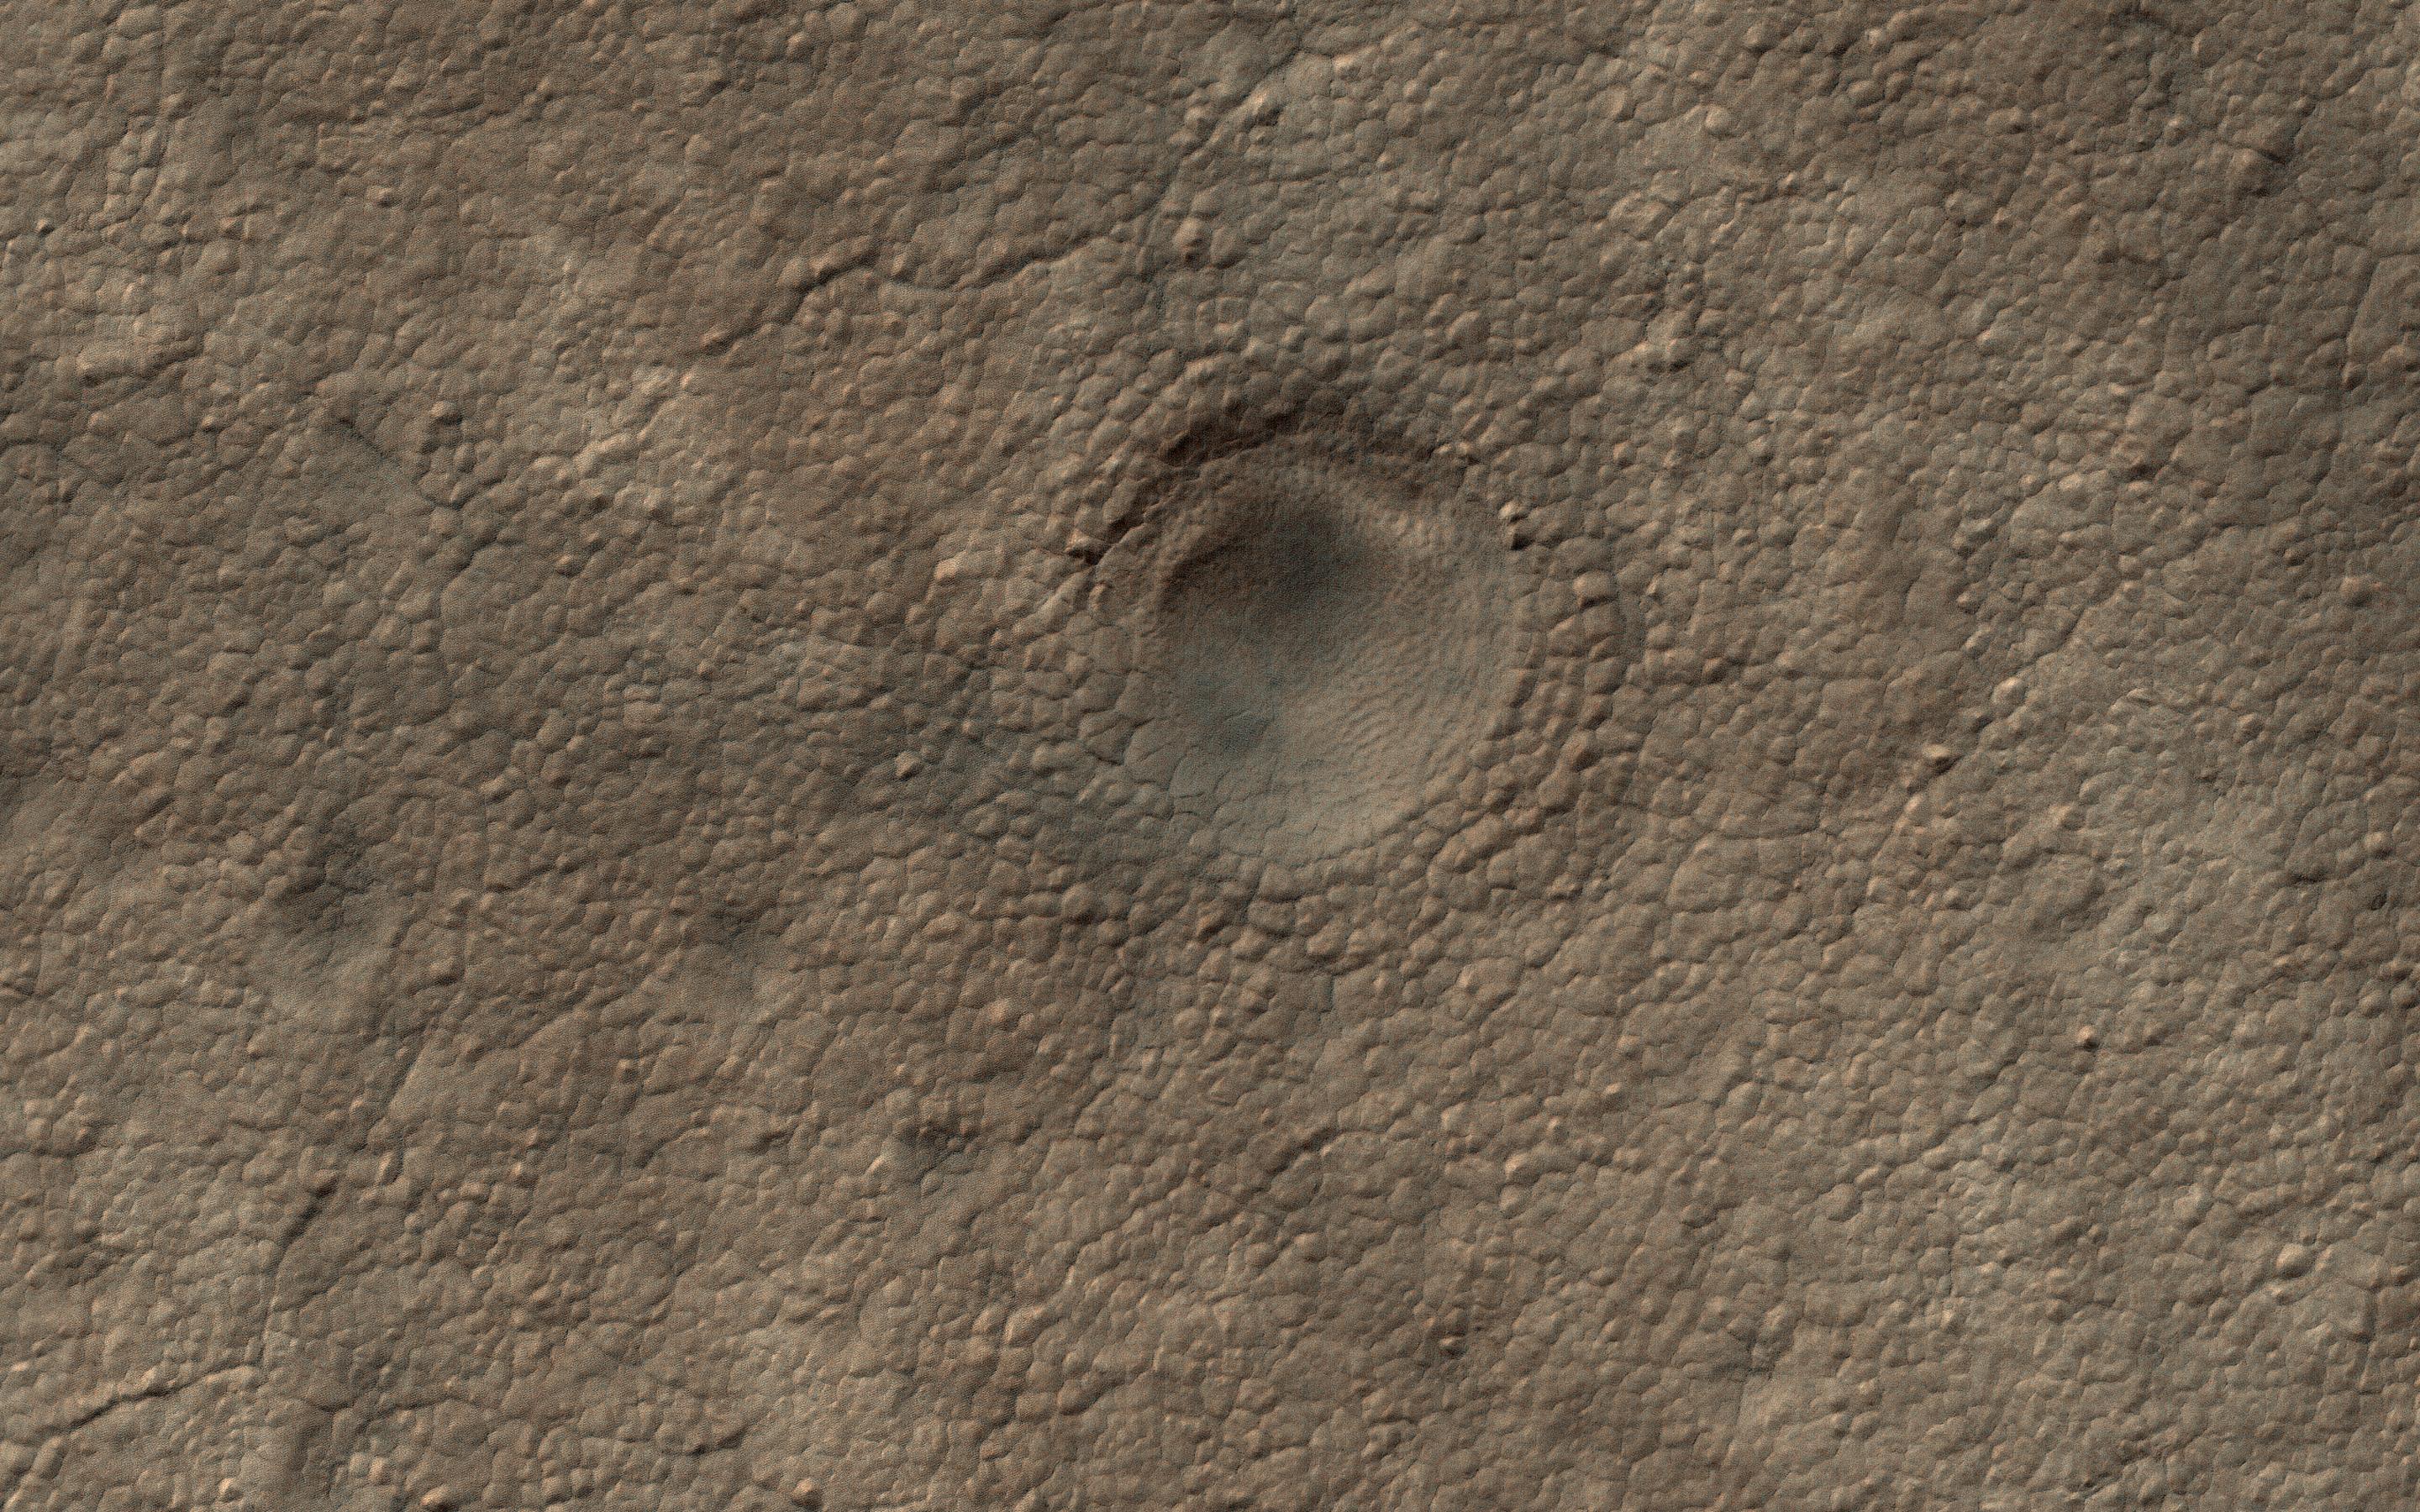 PIA23106: A Crater on the South Polar Layered Deposits